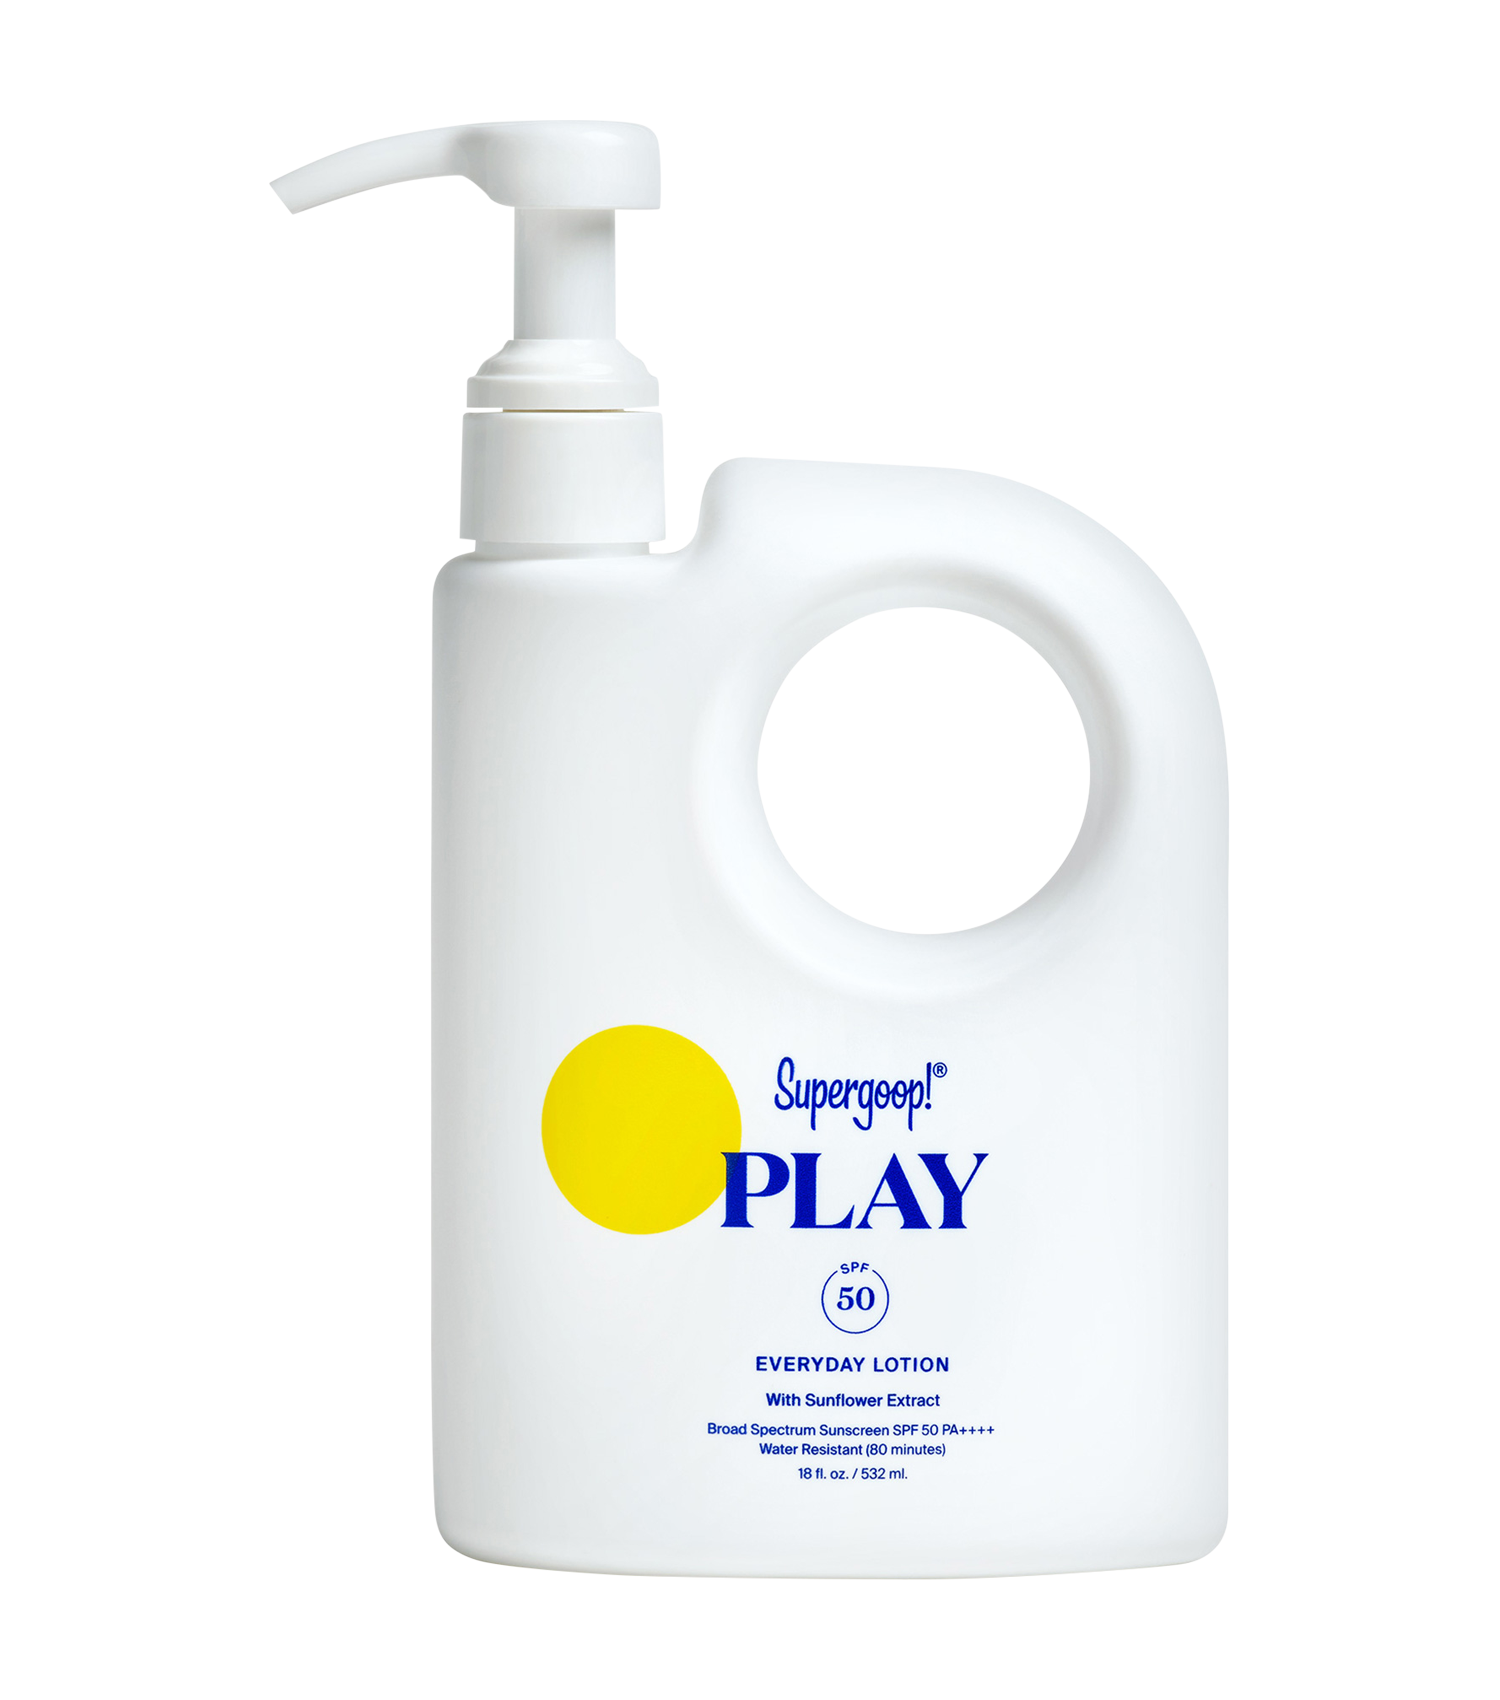 Supergoop! PLAY Everyday Lotion SPF 50 with Sunflower Extract - 18 oz.